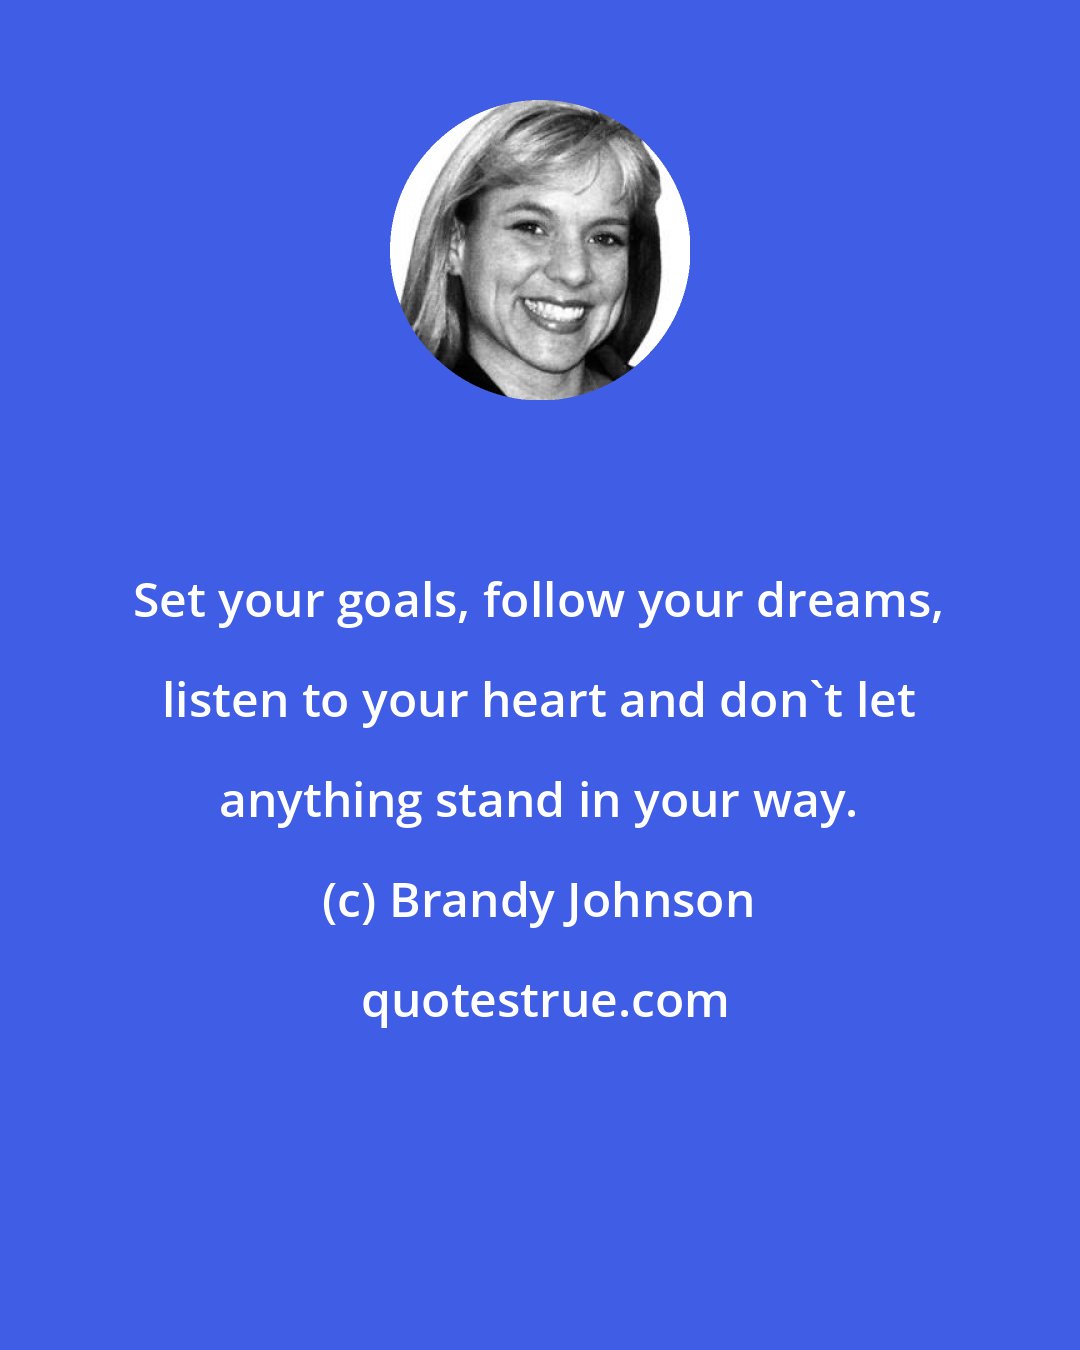 Brandy Johnson: Set your goals, follow your dreams, listen to your heart and don't let anything stand in your way.